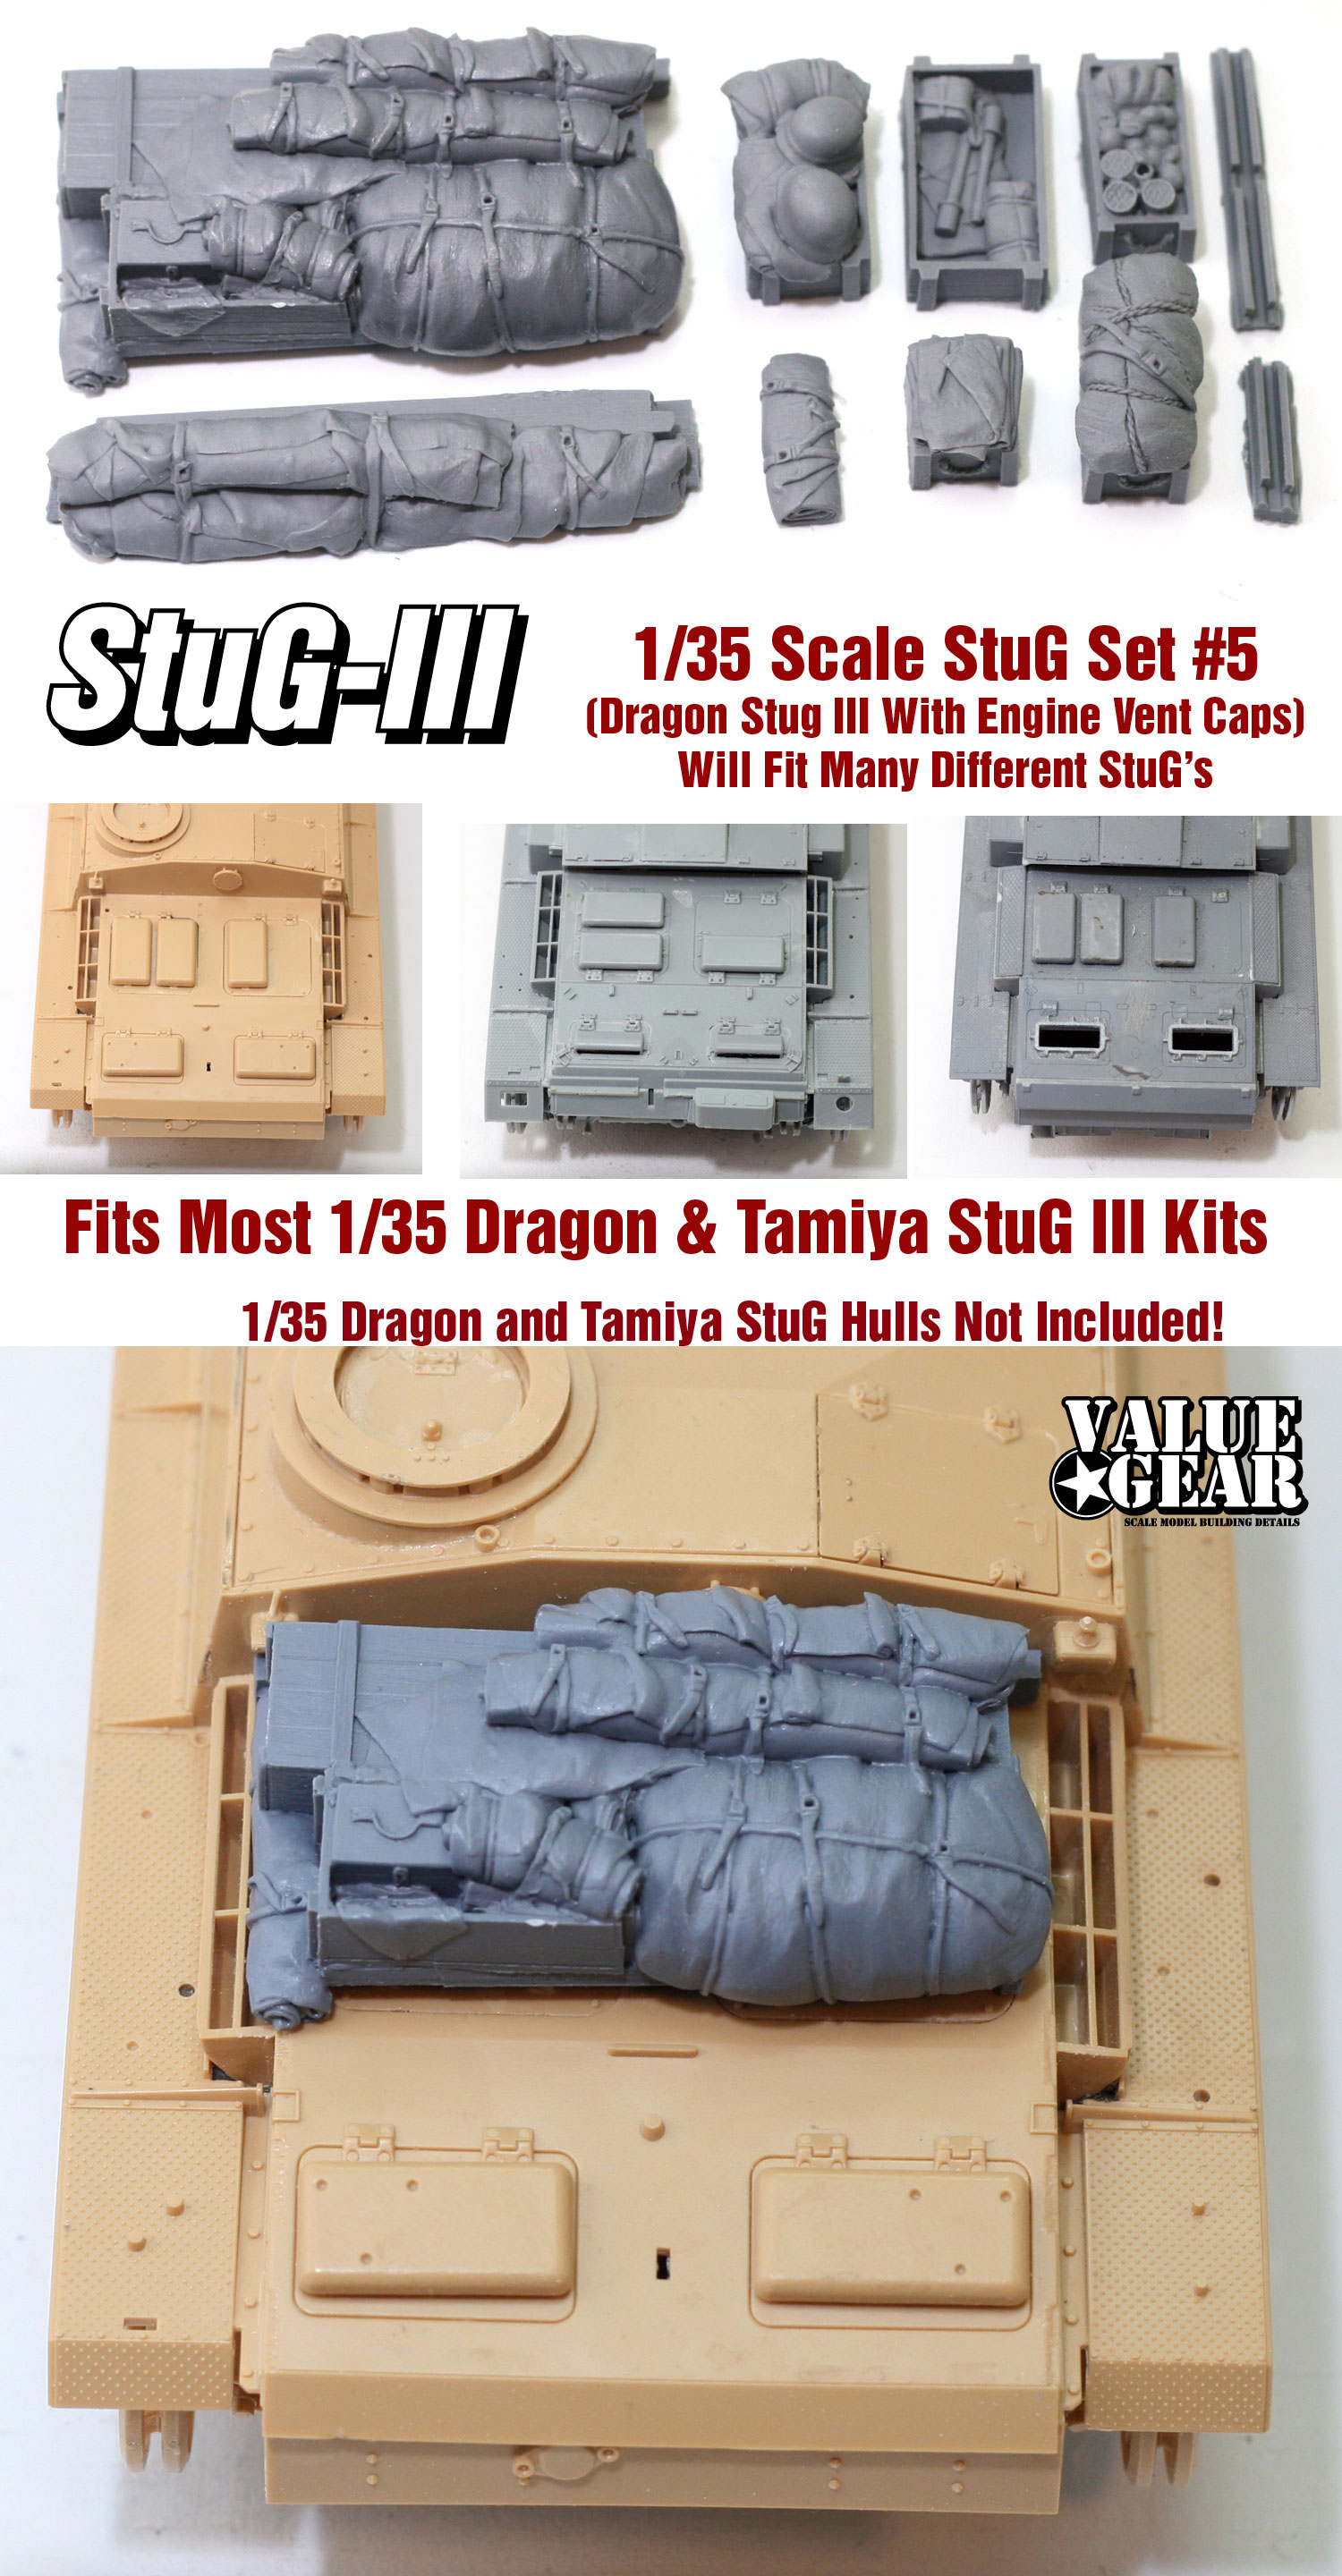 8 Pieces Value Gear Resin 1//35 Scale StuG IV Deck Stowage Set #7